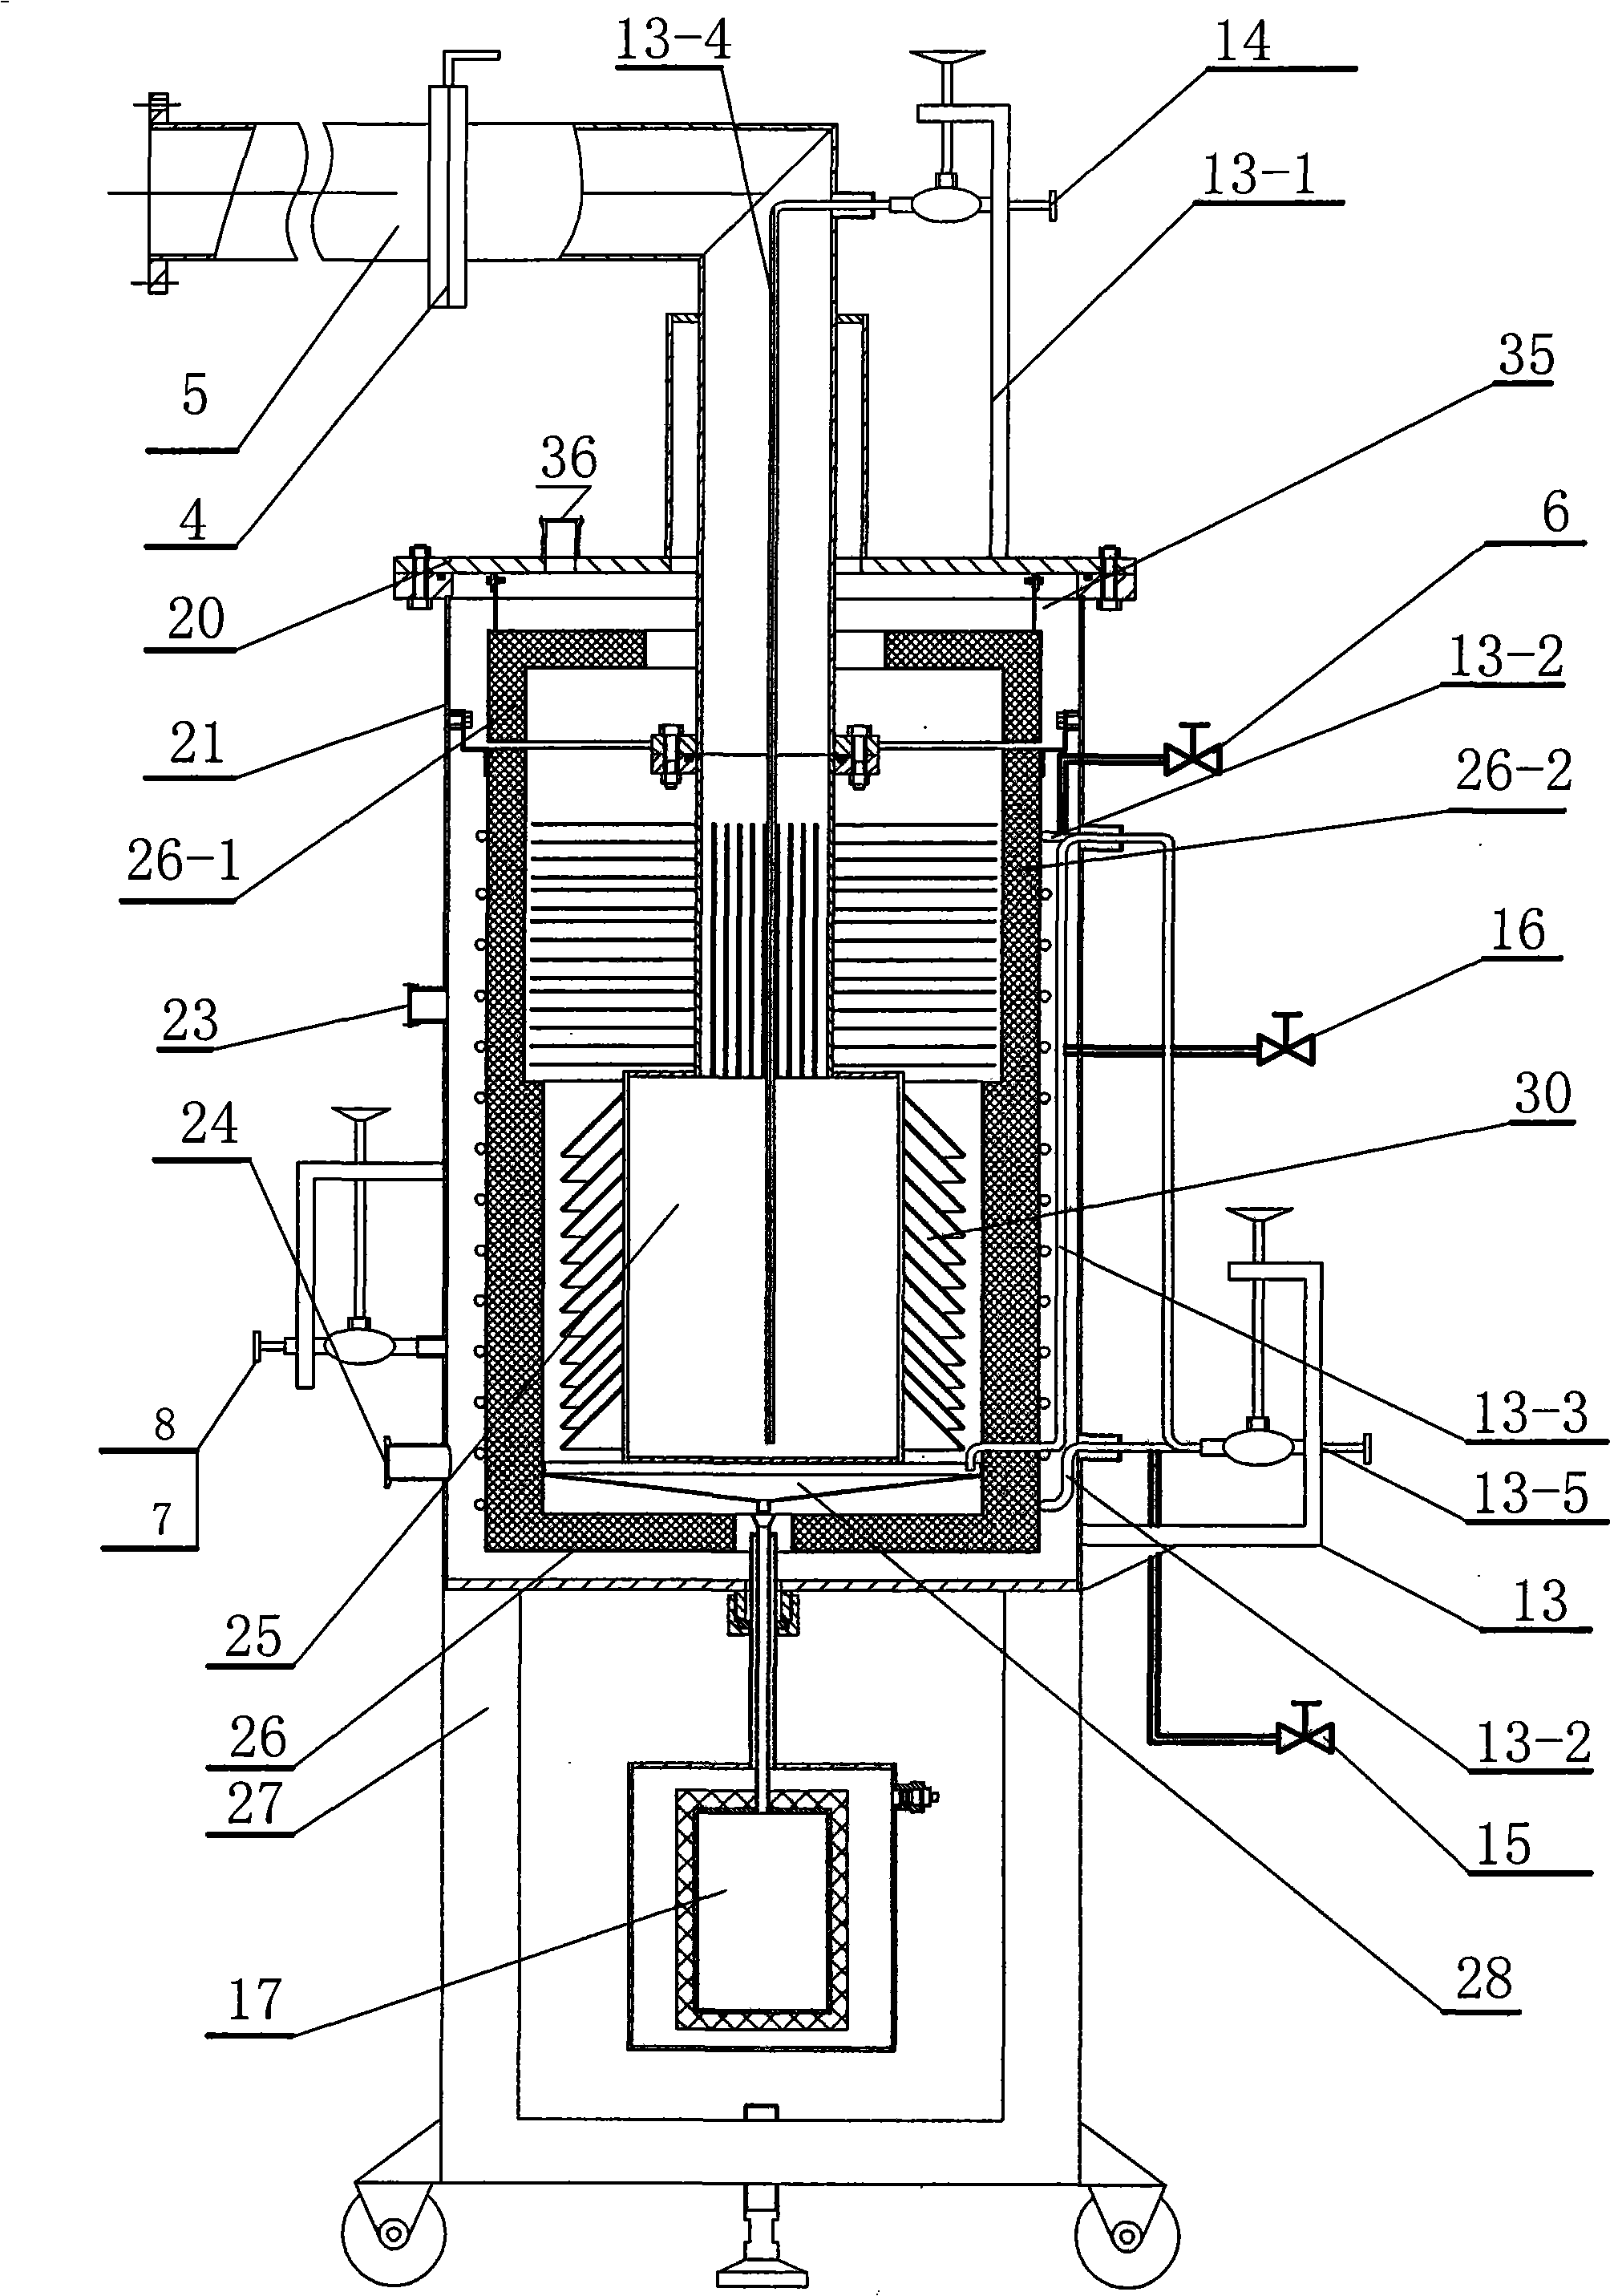 Rarefaction air condensing trapping device with liquid nitrogen suction refrigeration